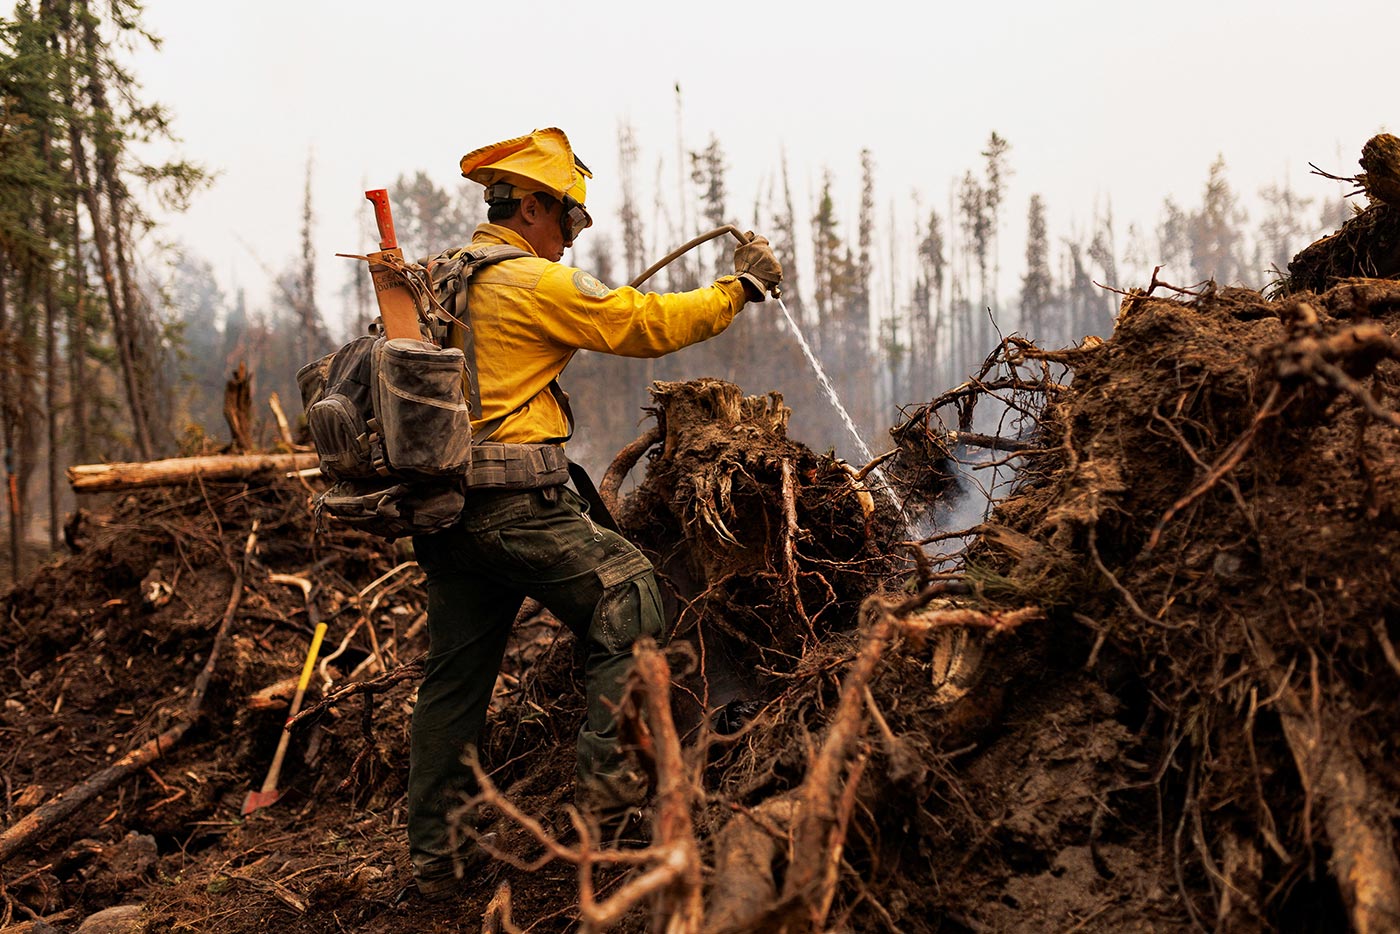 A firefighter from Mexico uses a hose to extinguish hotspots on a wildfire burning near Vanderhoof, British Columbia, Canada - 13 July 2023